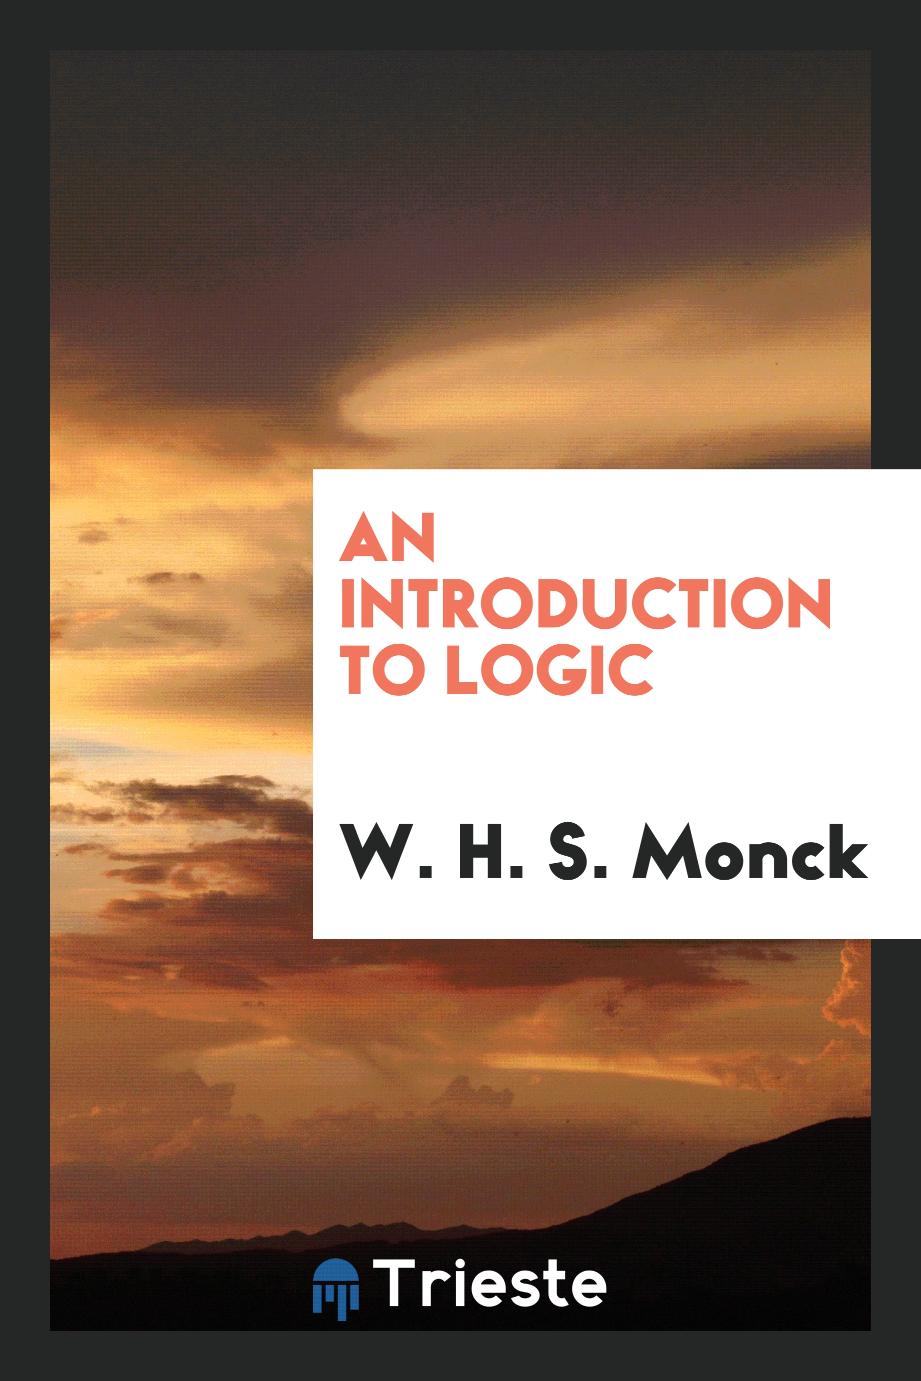 An introduction to logic